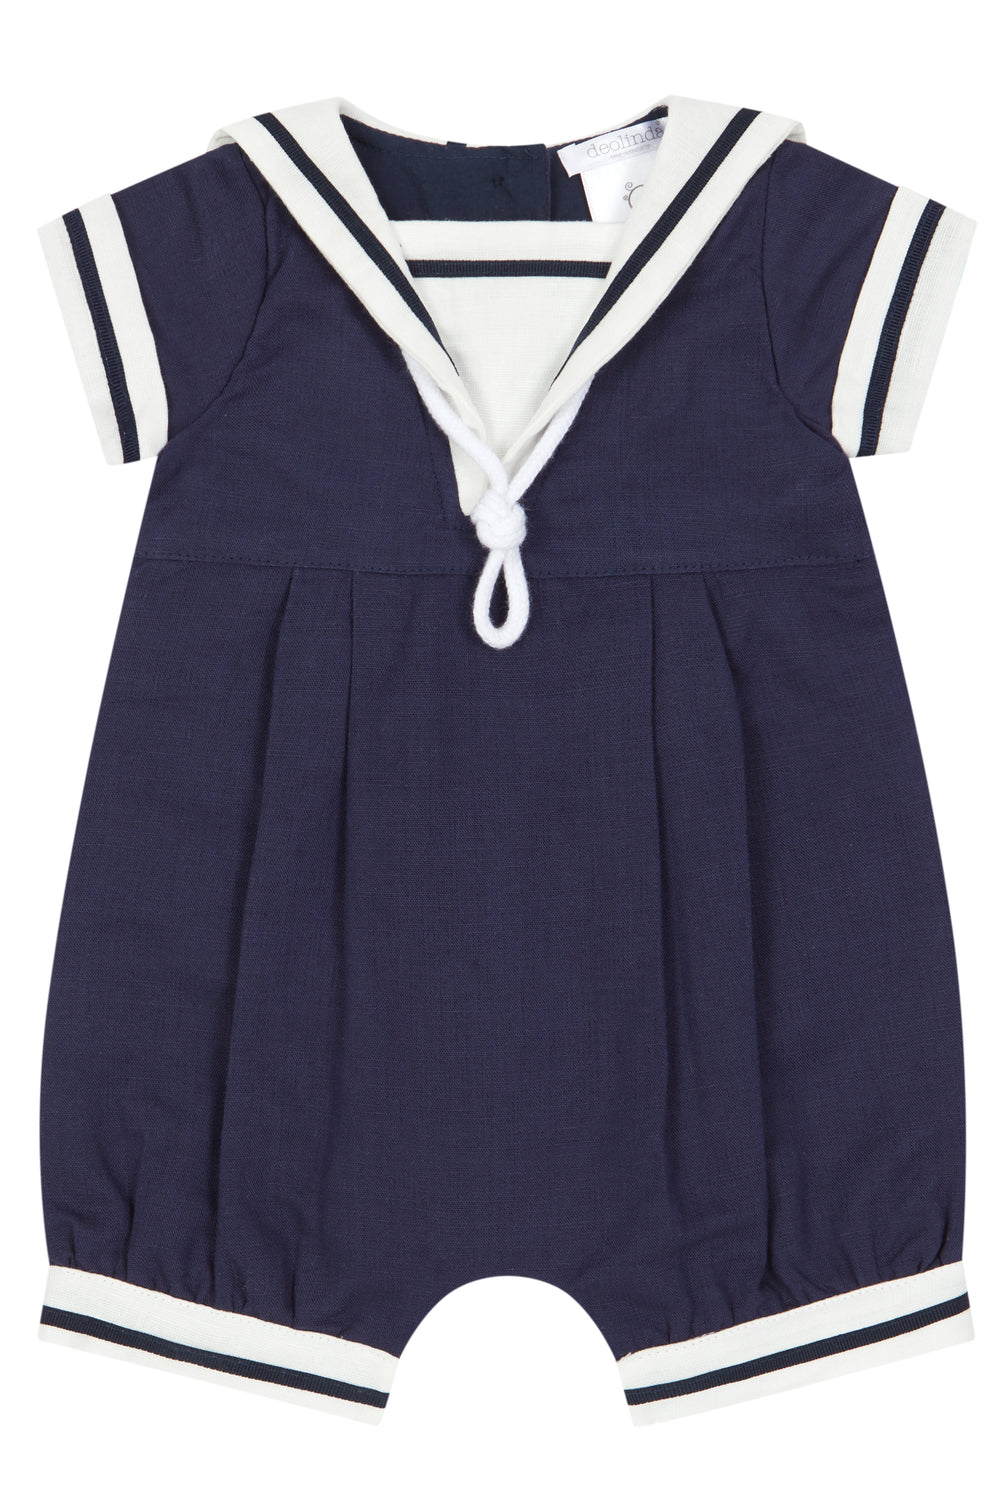 Chic by Deolinda PREORDER "Jacques" Navy Sailor Romper | Millie and John